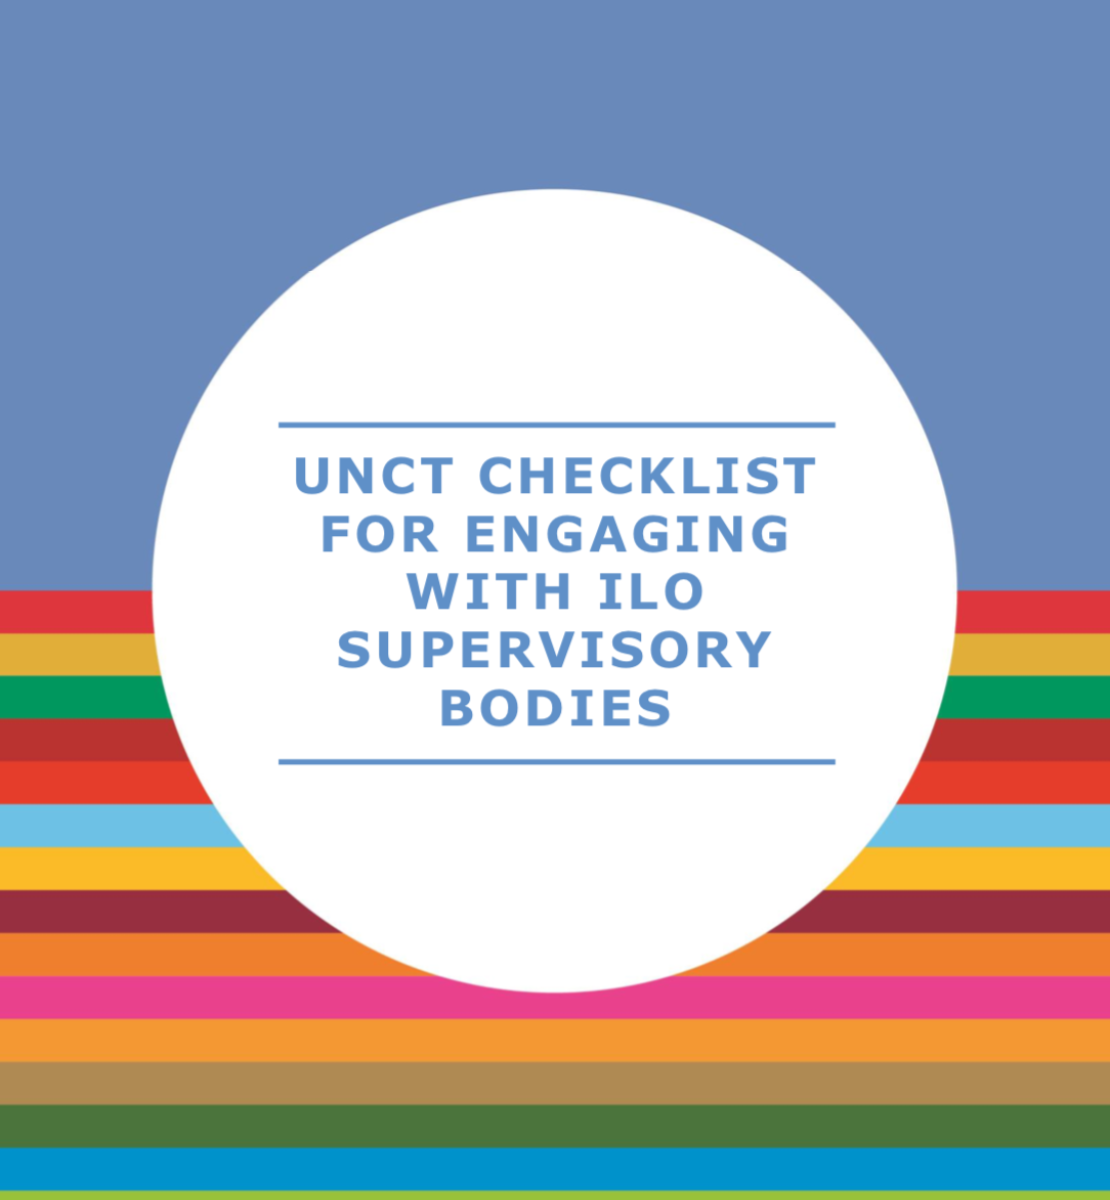 Cover shows the title, "UNCT Checklist for Engaging with ILO Supervisory Bodies" in the centre of a solid circle in front of a solid and striped background.